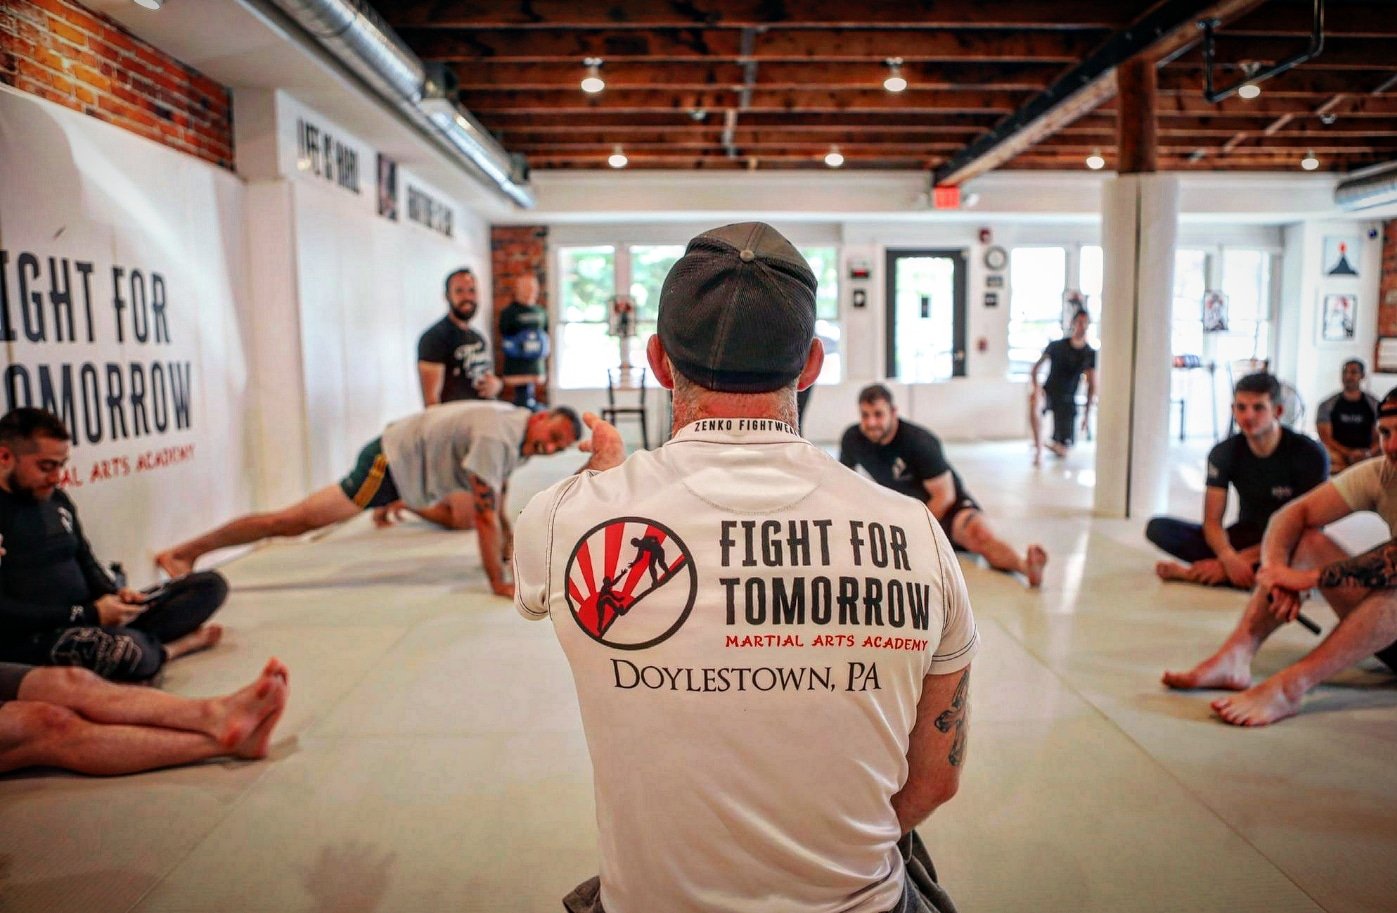 The Fight for Tomorrow Martial Arts Academy